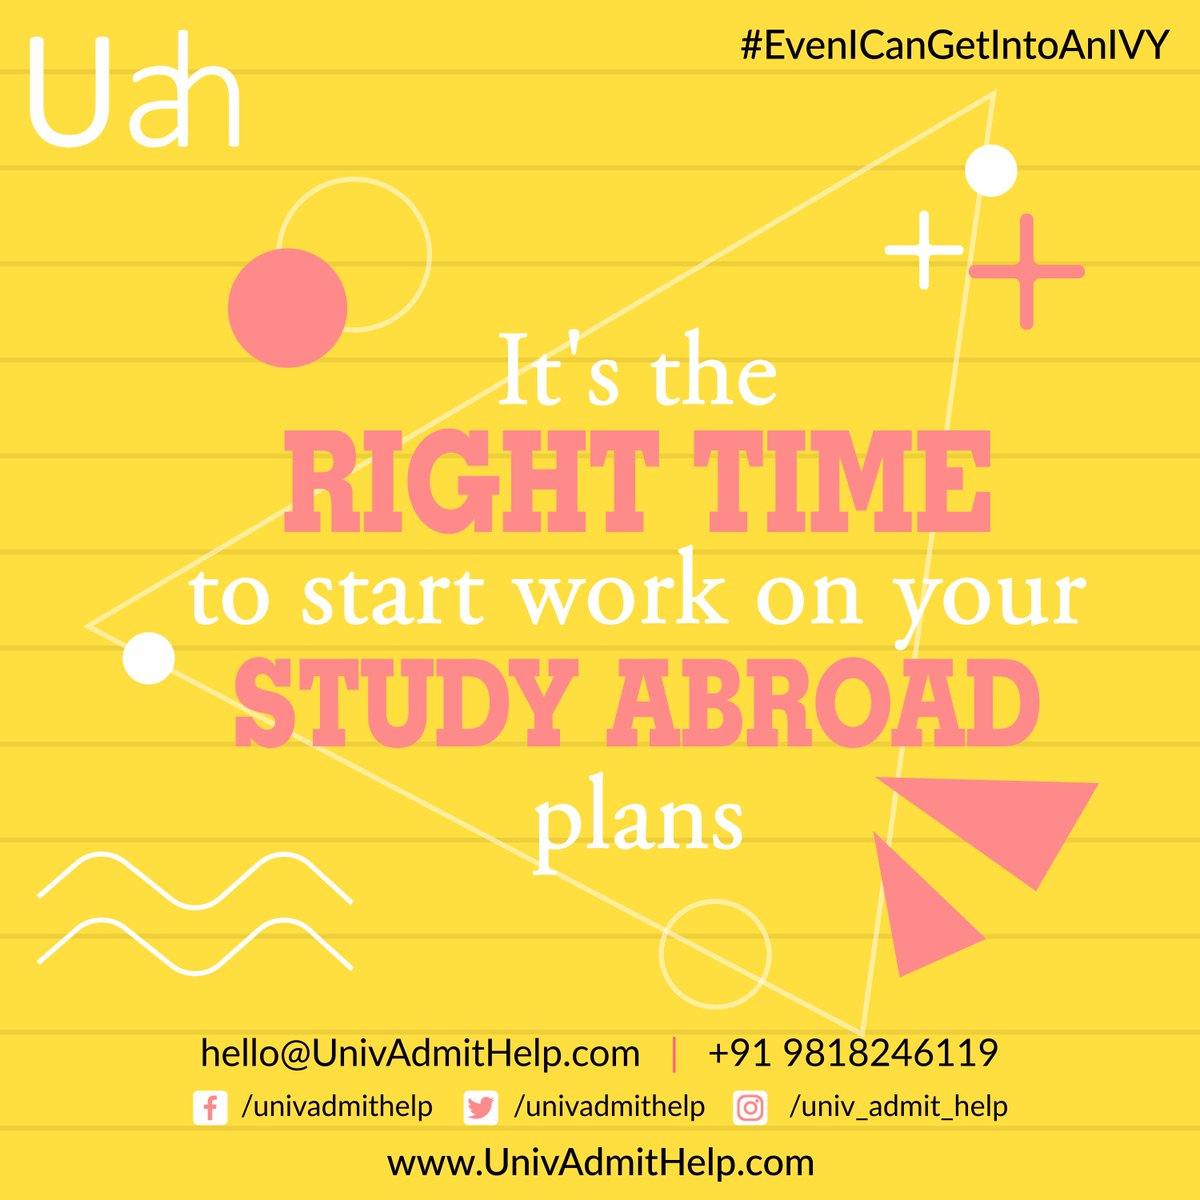 ATTENTION: Grade 9, 10 and 11 students!

It's the RIGHT TIME to start work on your STUDY ABROAD plans...
Call/whatsapp at 9818246119 for a 30 mins FREE session.
#EvenICanGetIntoAnIvy #studyabroad2022 #counselorgurgaon #counselordelhi #Highereducationabroad #StudyAbroadConsultants